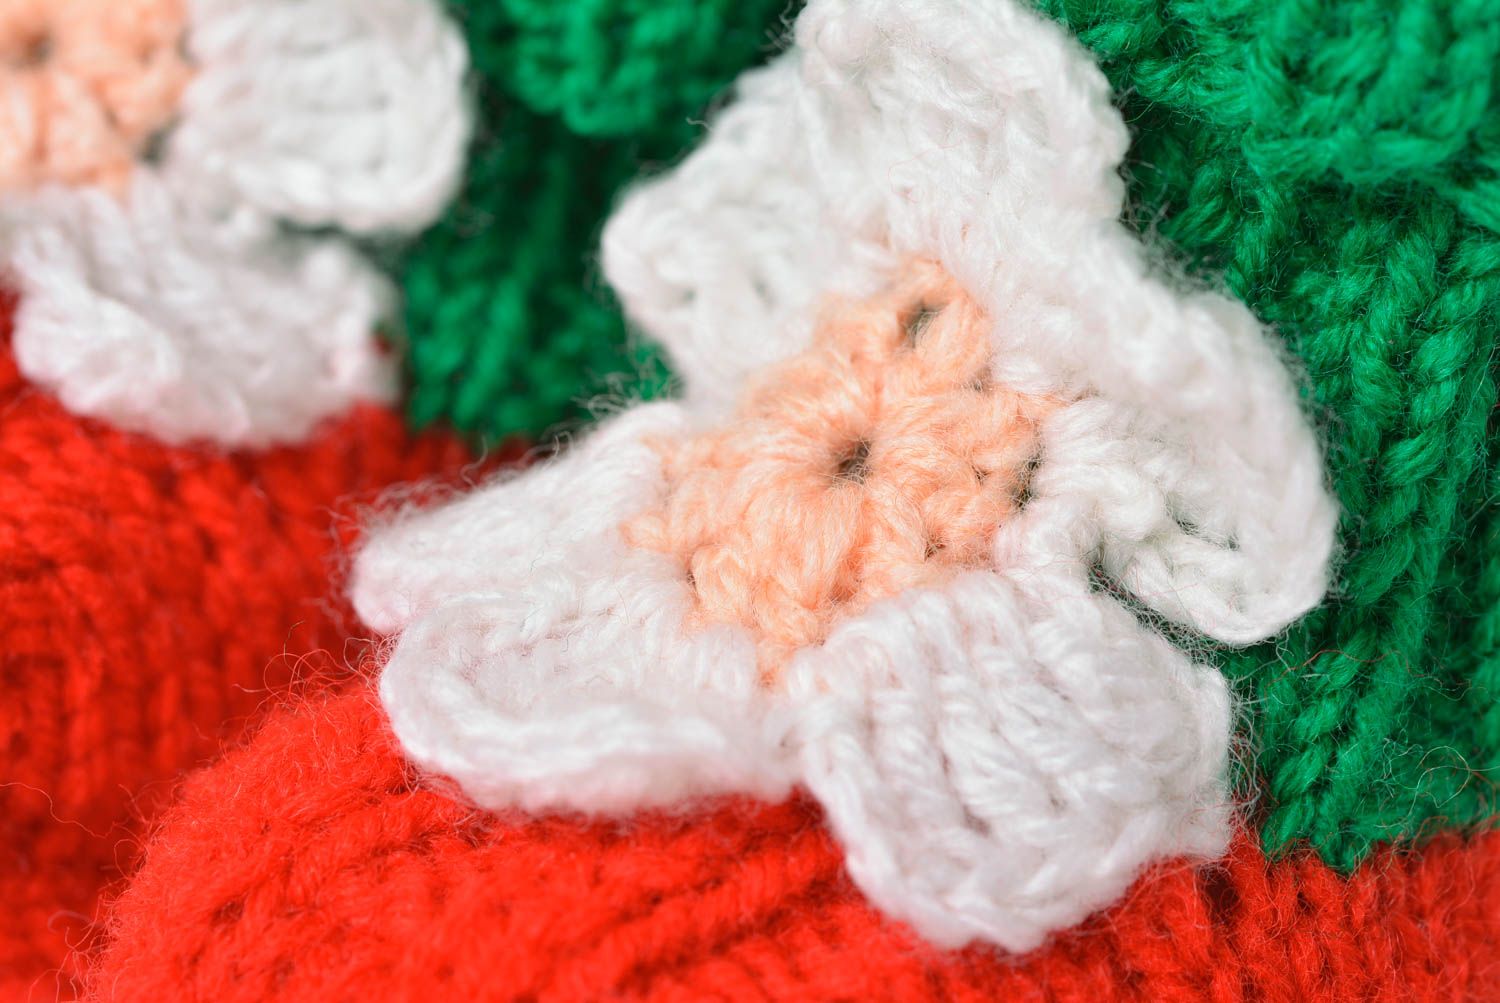 Handmade knitted baby booties made of wool winter socks for small children photo 2